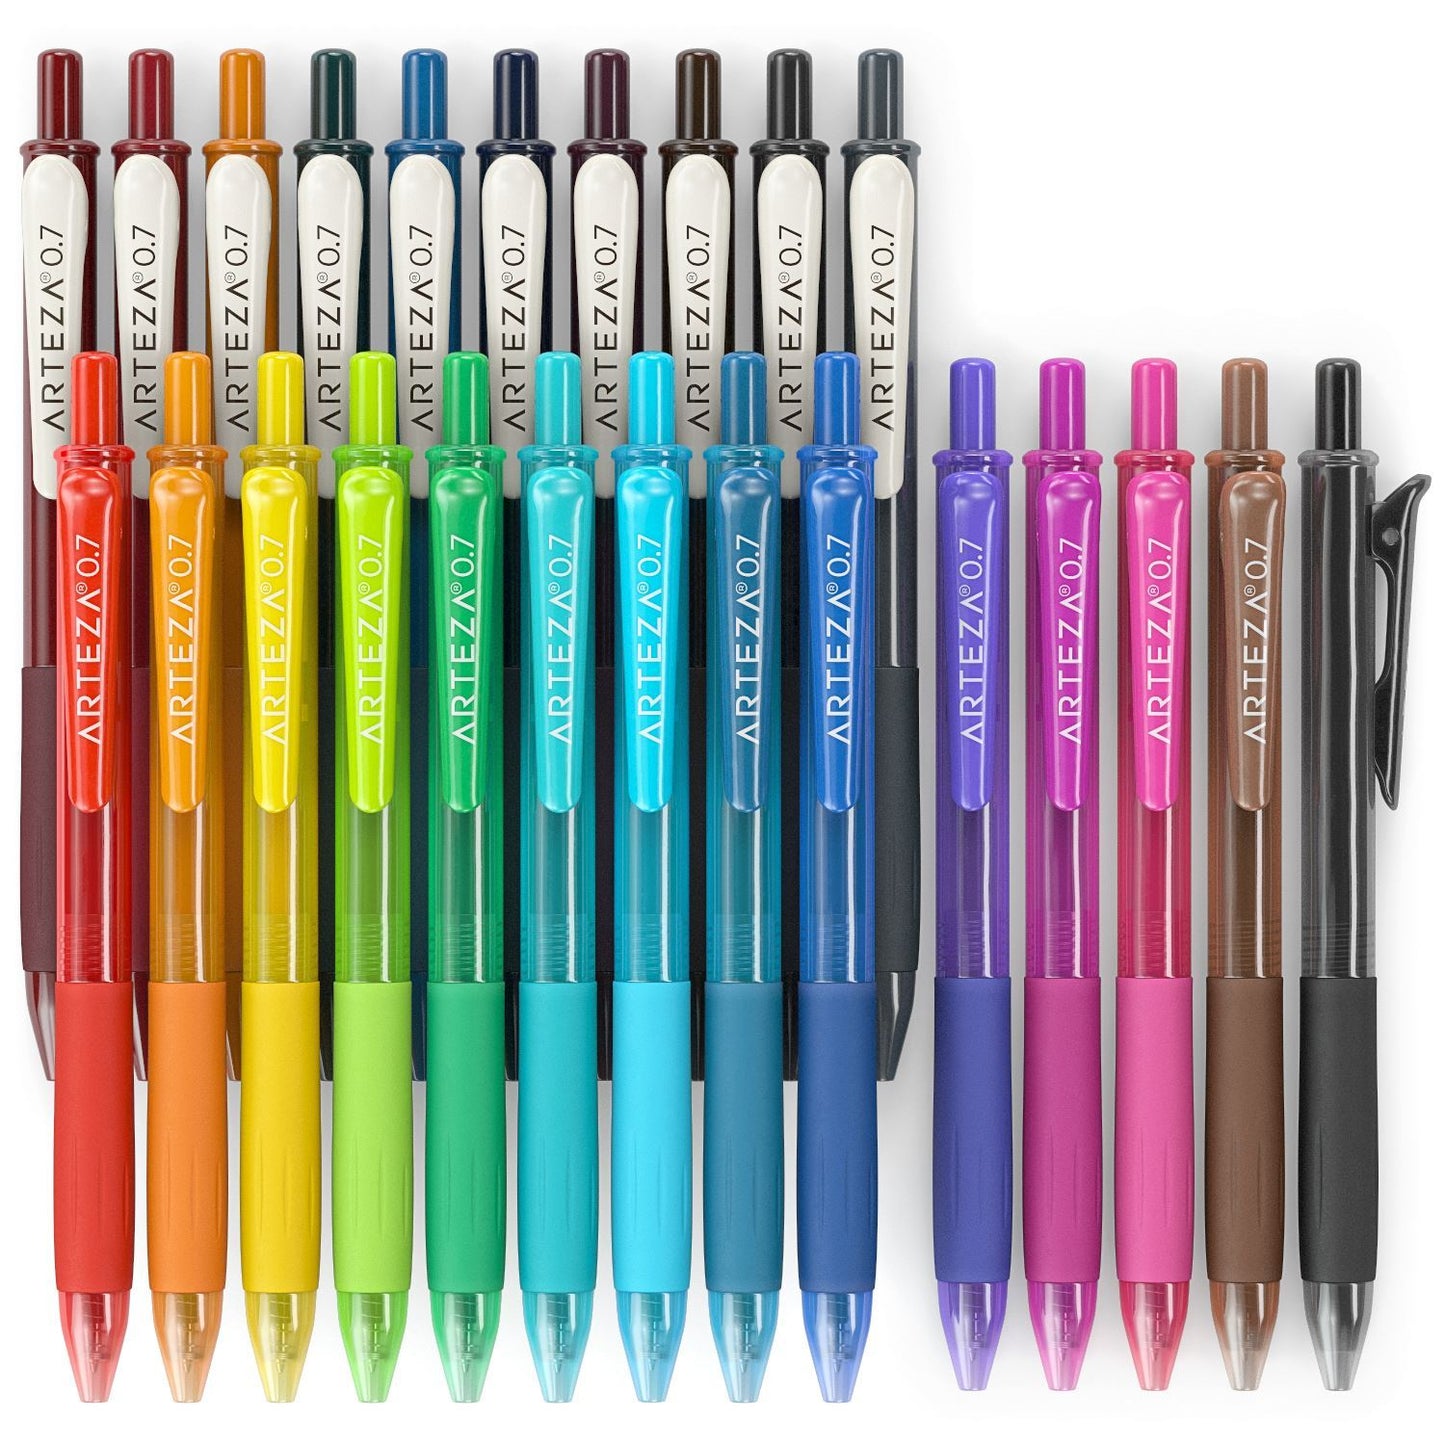 Crayon Pen: High-quality ink pen styled after classic crayons